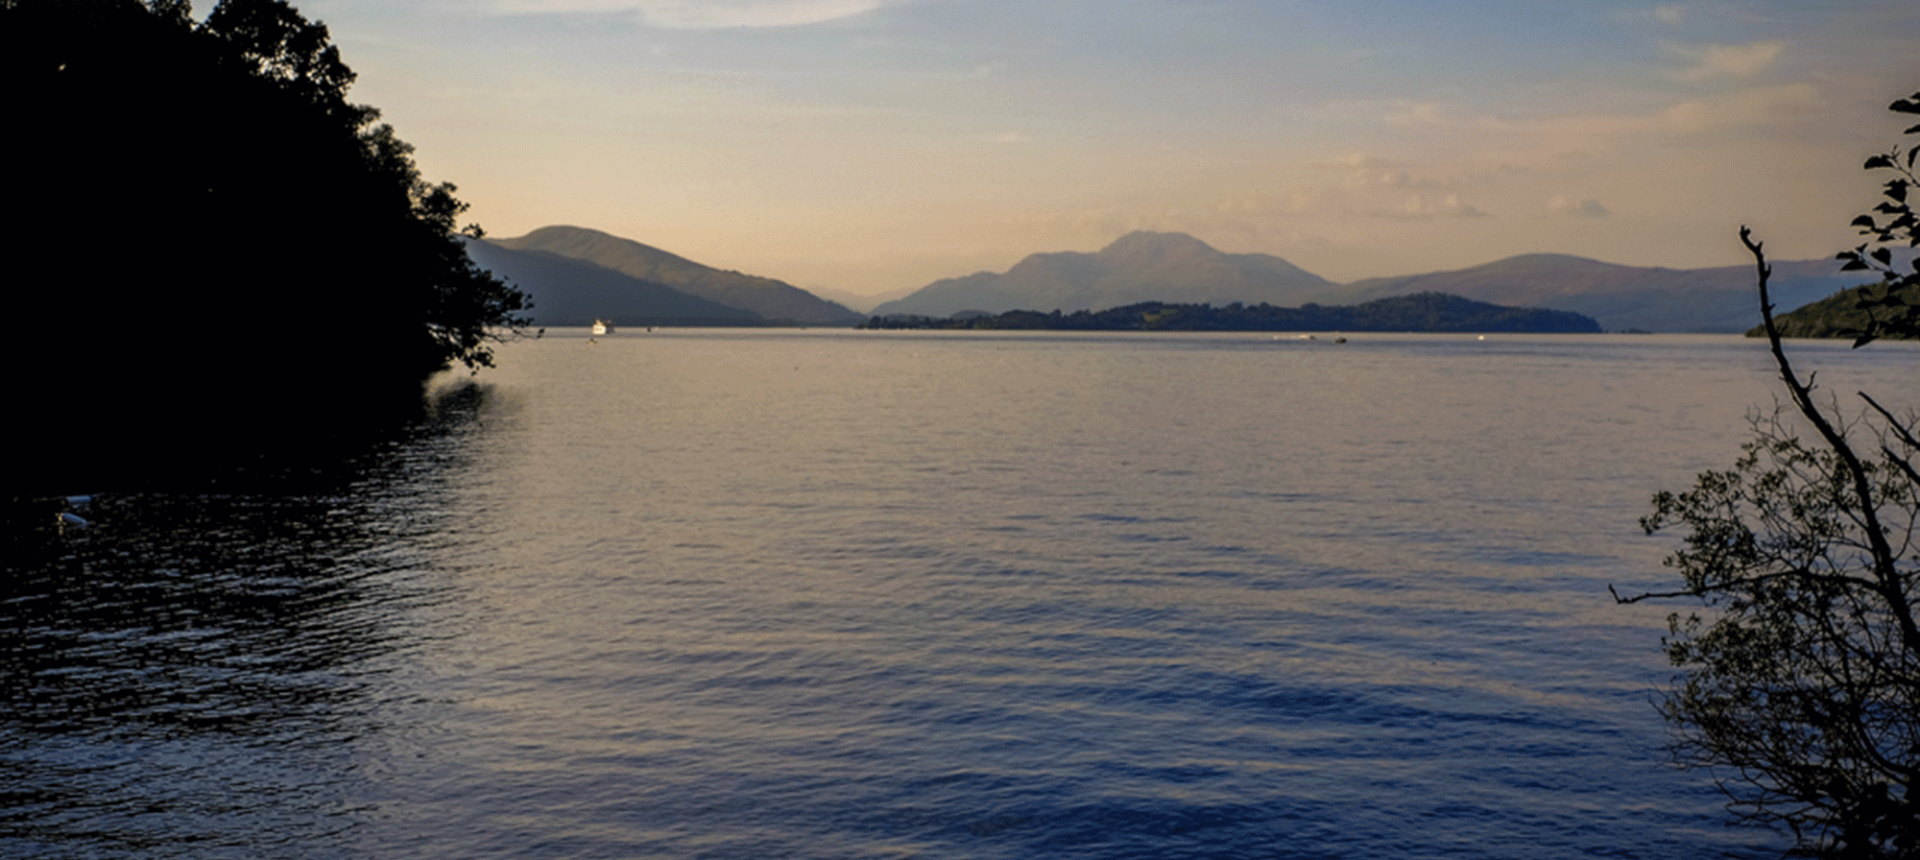 large body of water with mountains in the far background and the sun setting